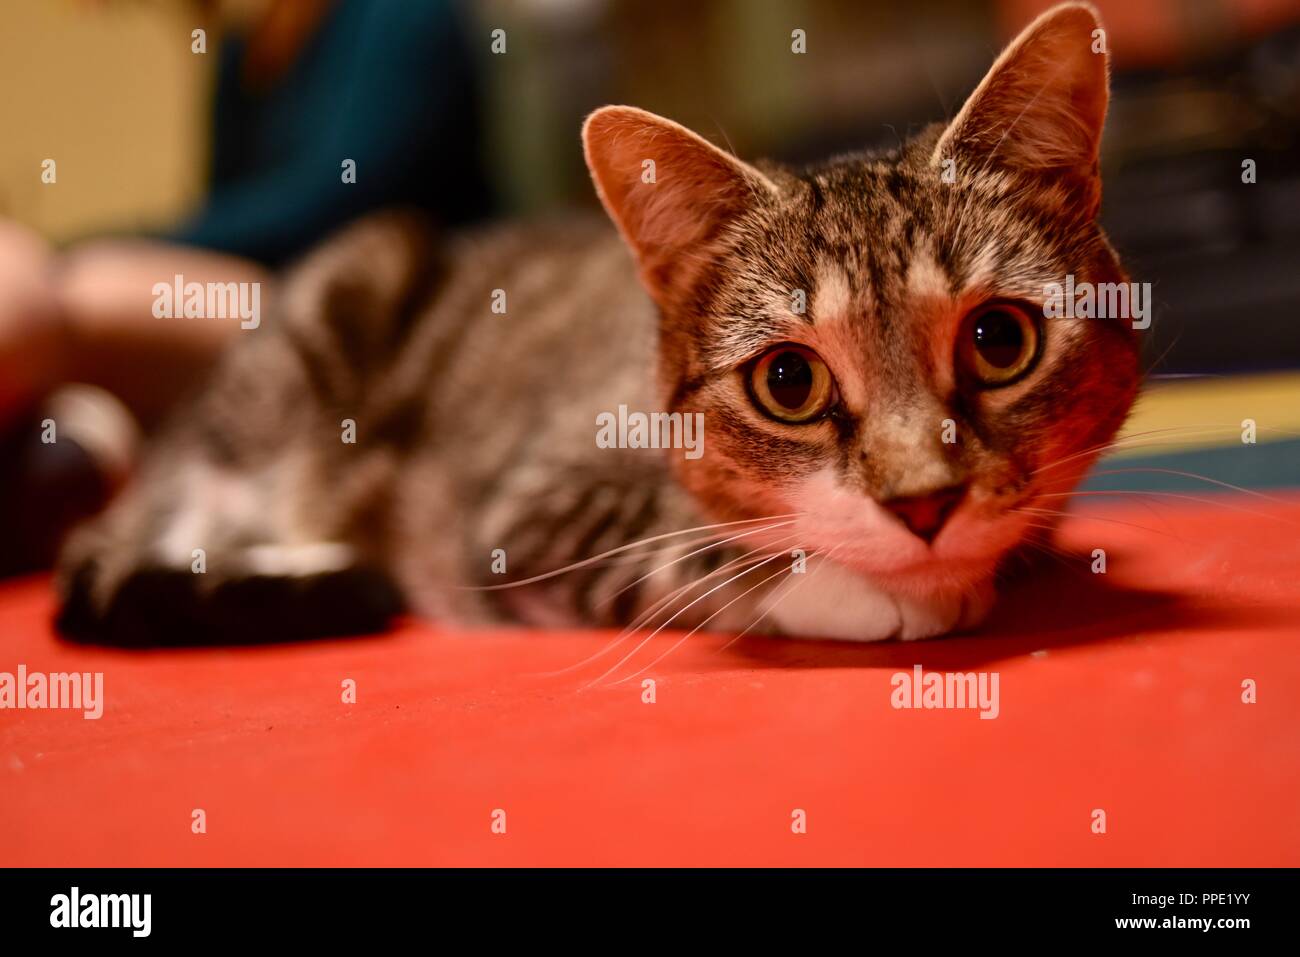 Adult cat pet laying on the ground floor staring with large eyes, Madison, Wisconsin Stock Photo